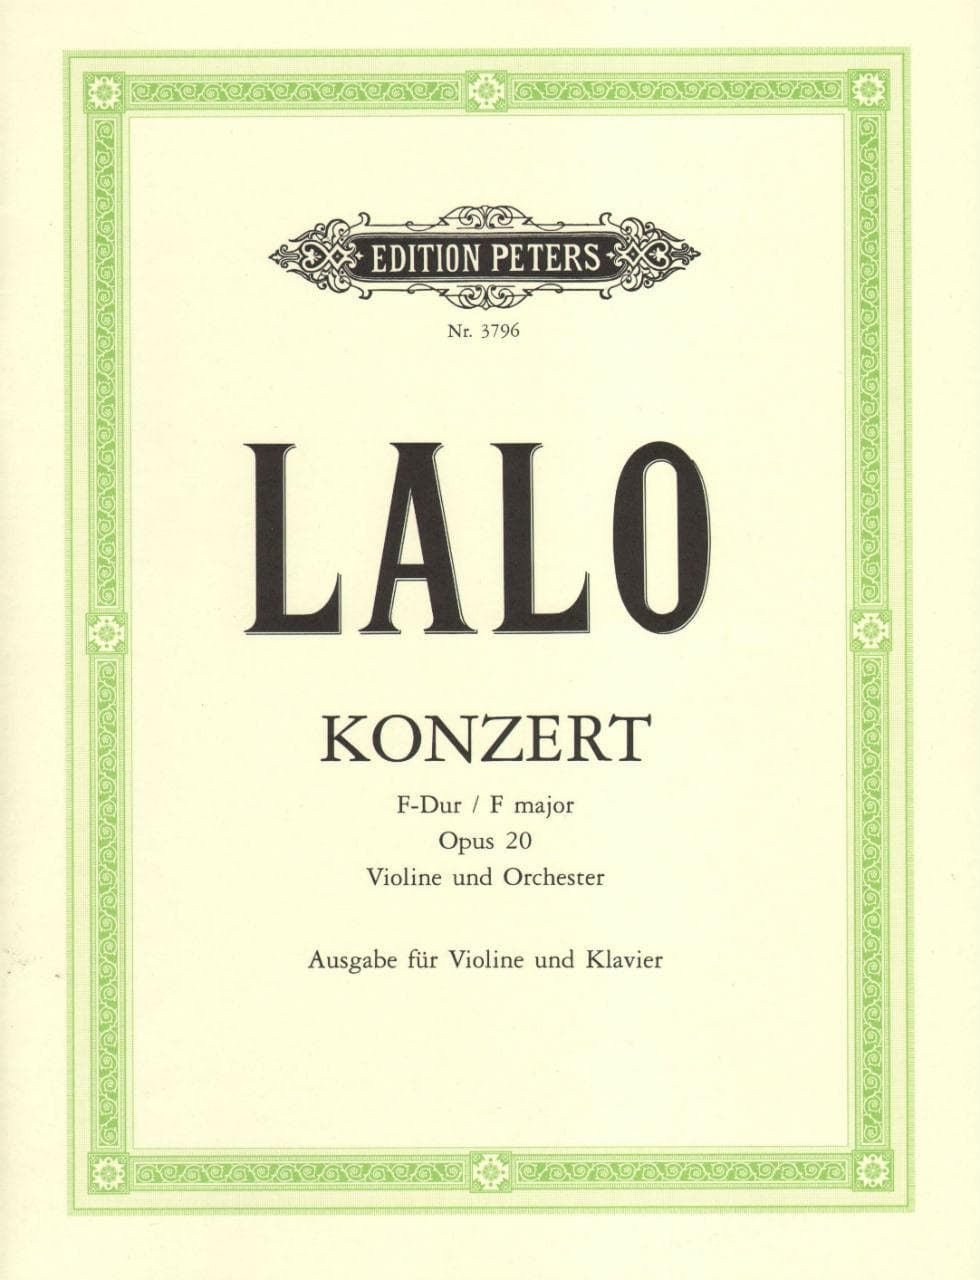 Lalo, Edouard - Concerto in F Major, Op 20 - Violin and Piano - edited by Carl Herrmann - Edition Peters